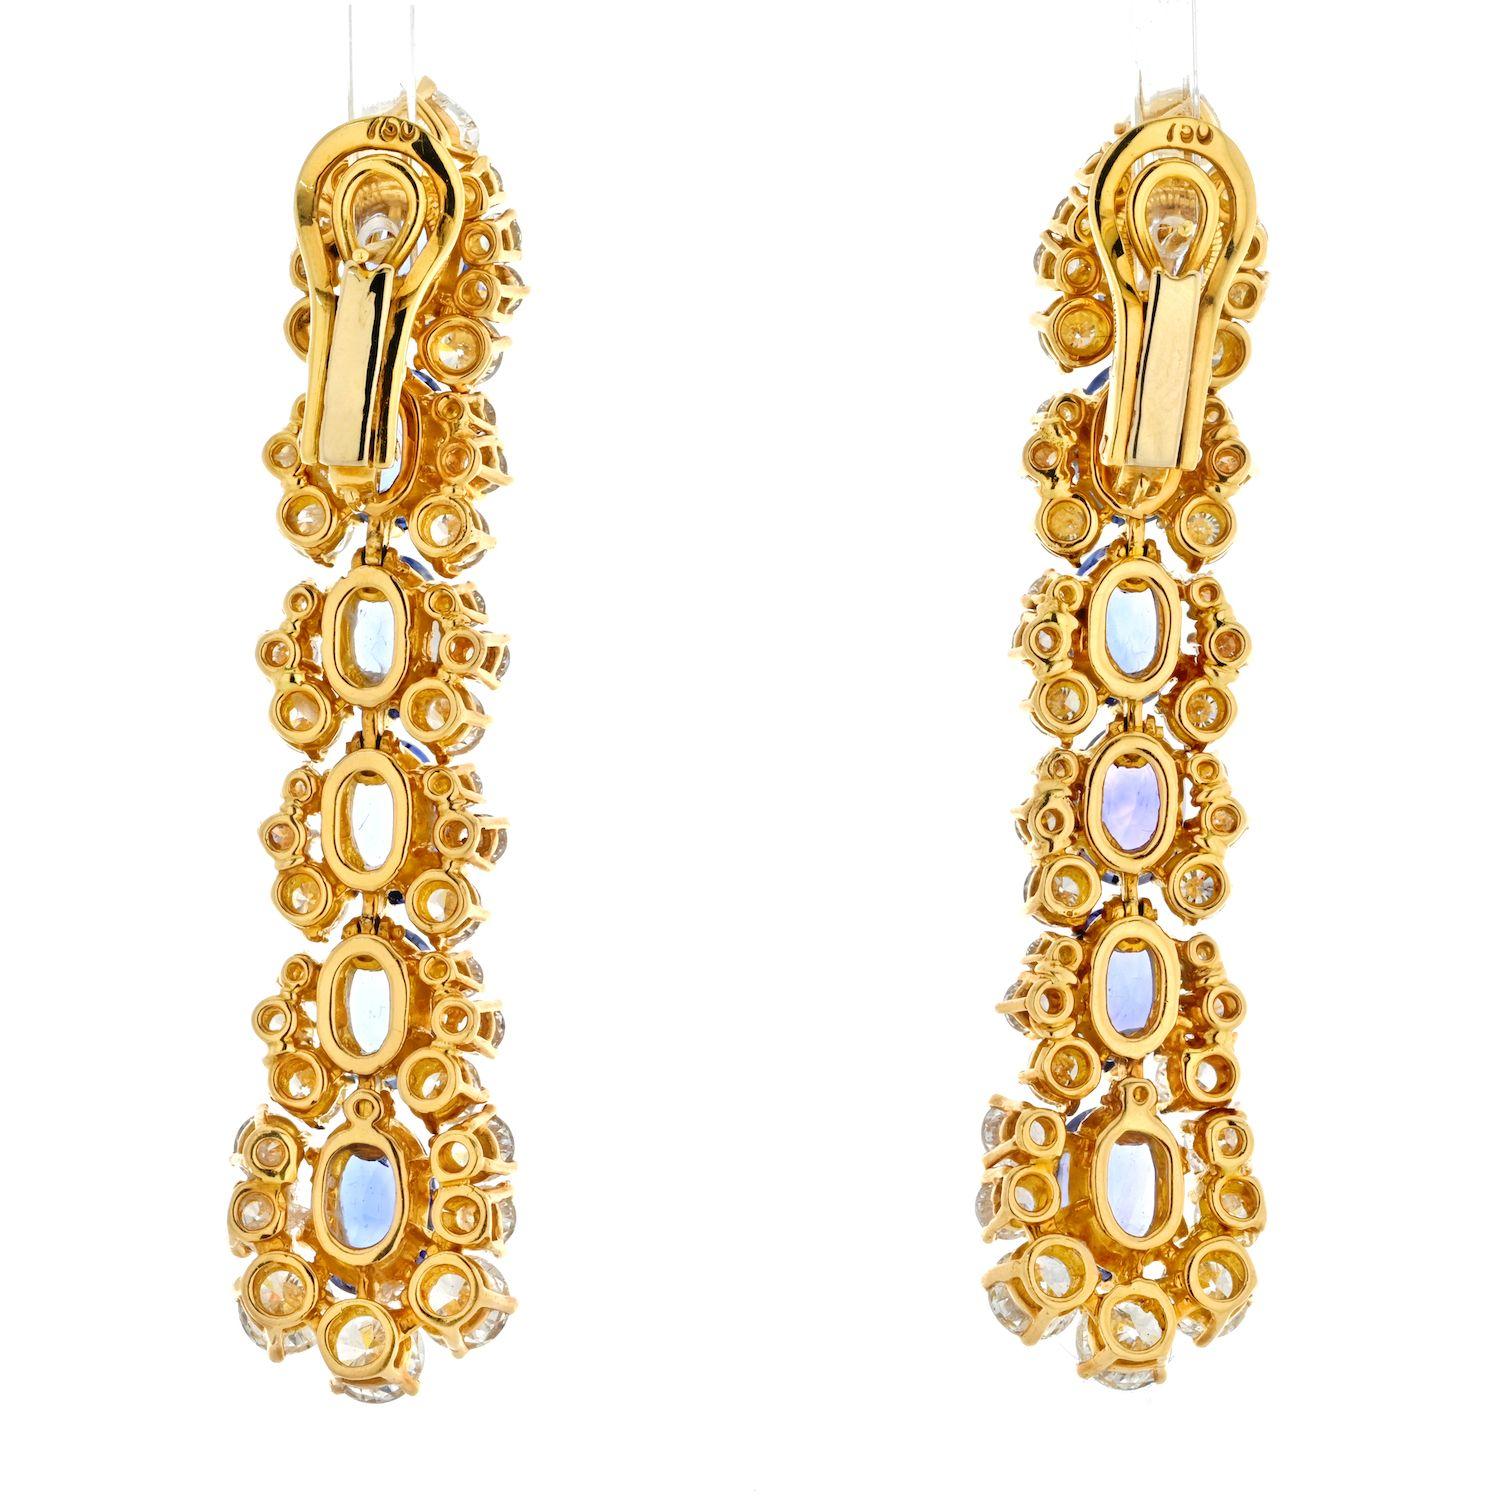 The Marina B 18K yellow gold diamond and sapphire dangling earrings are truly special. They feature a unique design with a combination of stunning diamonds, yellow gold, and vibrant sapphires to create a truly eye-catching piece. The luxurious